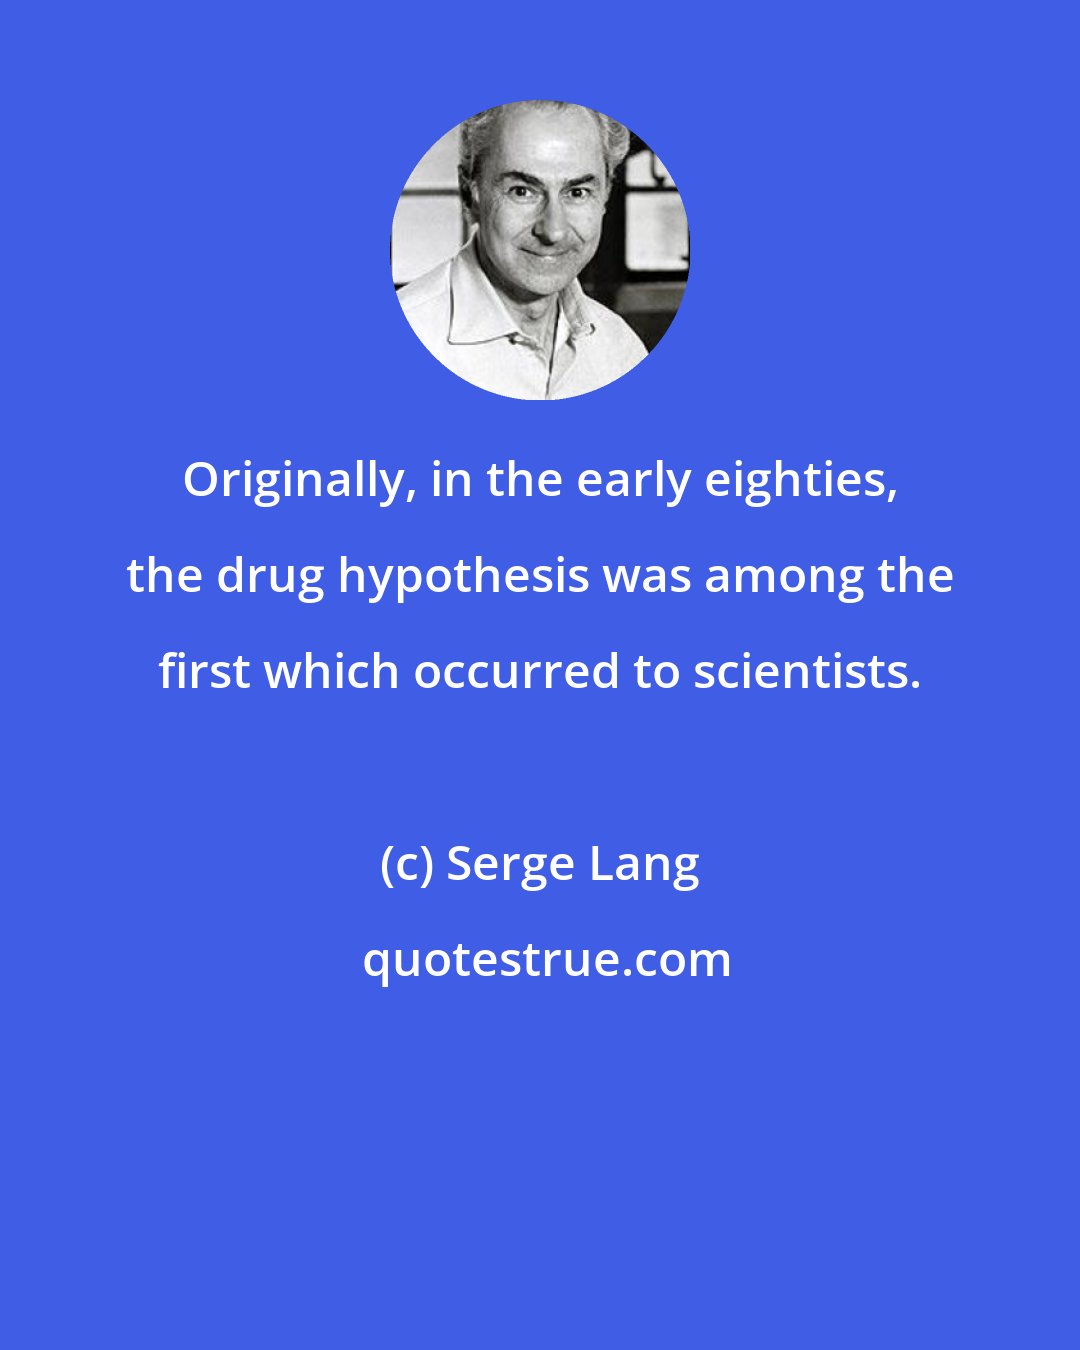 Serge Lang: Originally, in the early eighties, the drug hypothesis was among the first which occurred to scientists.